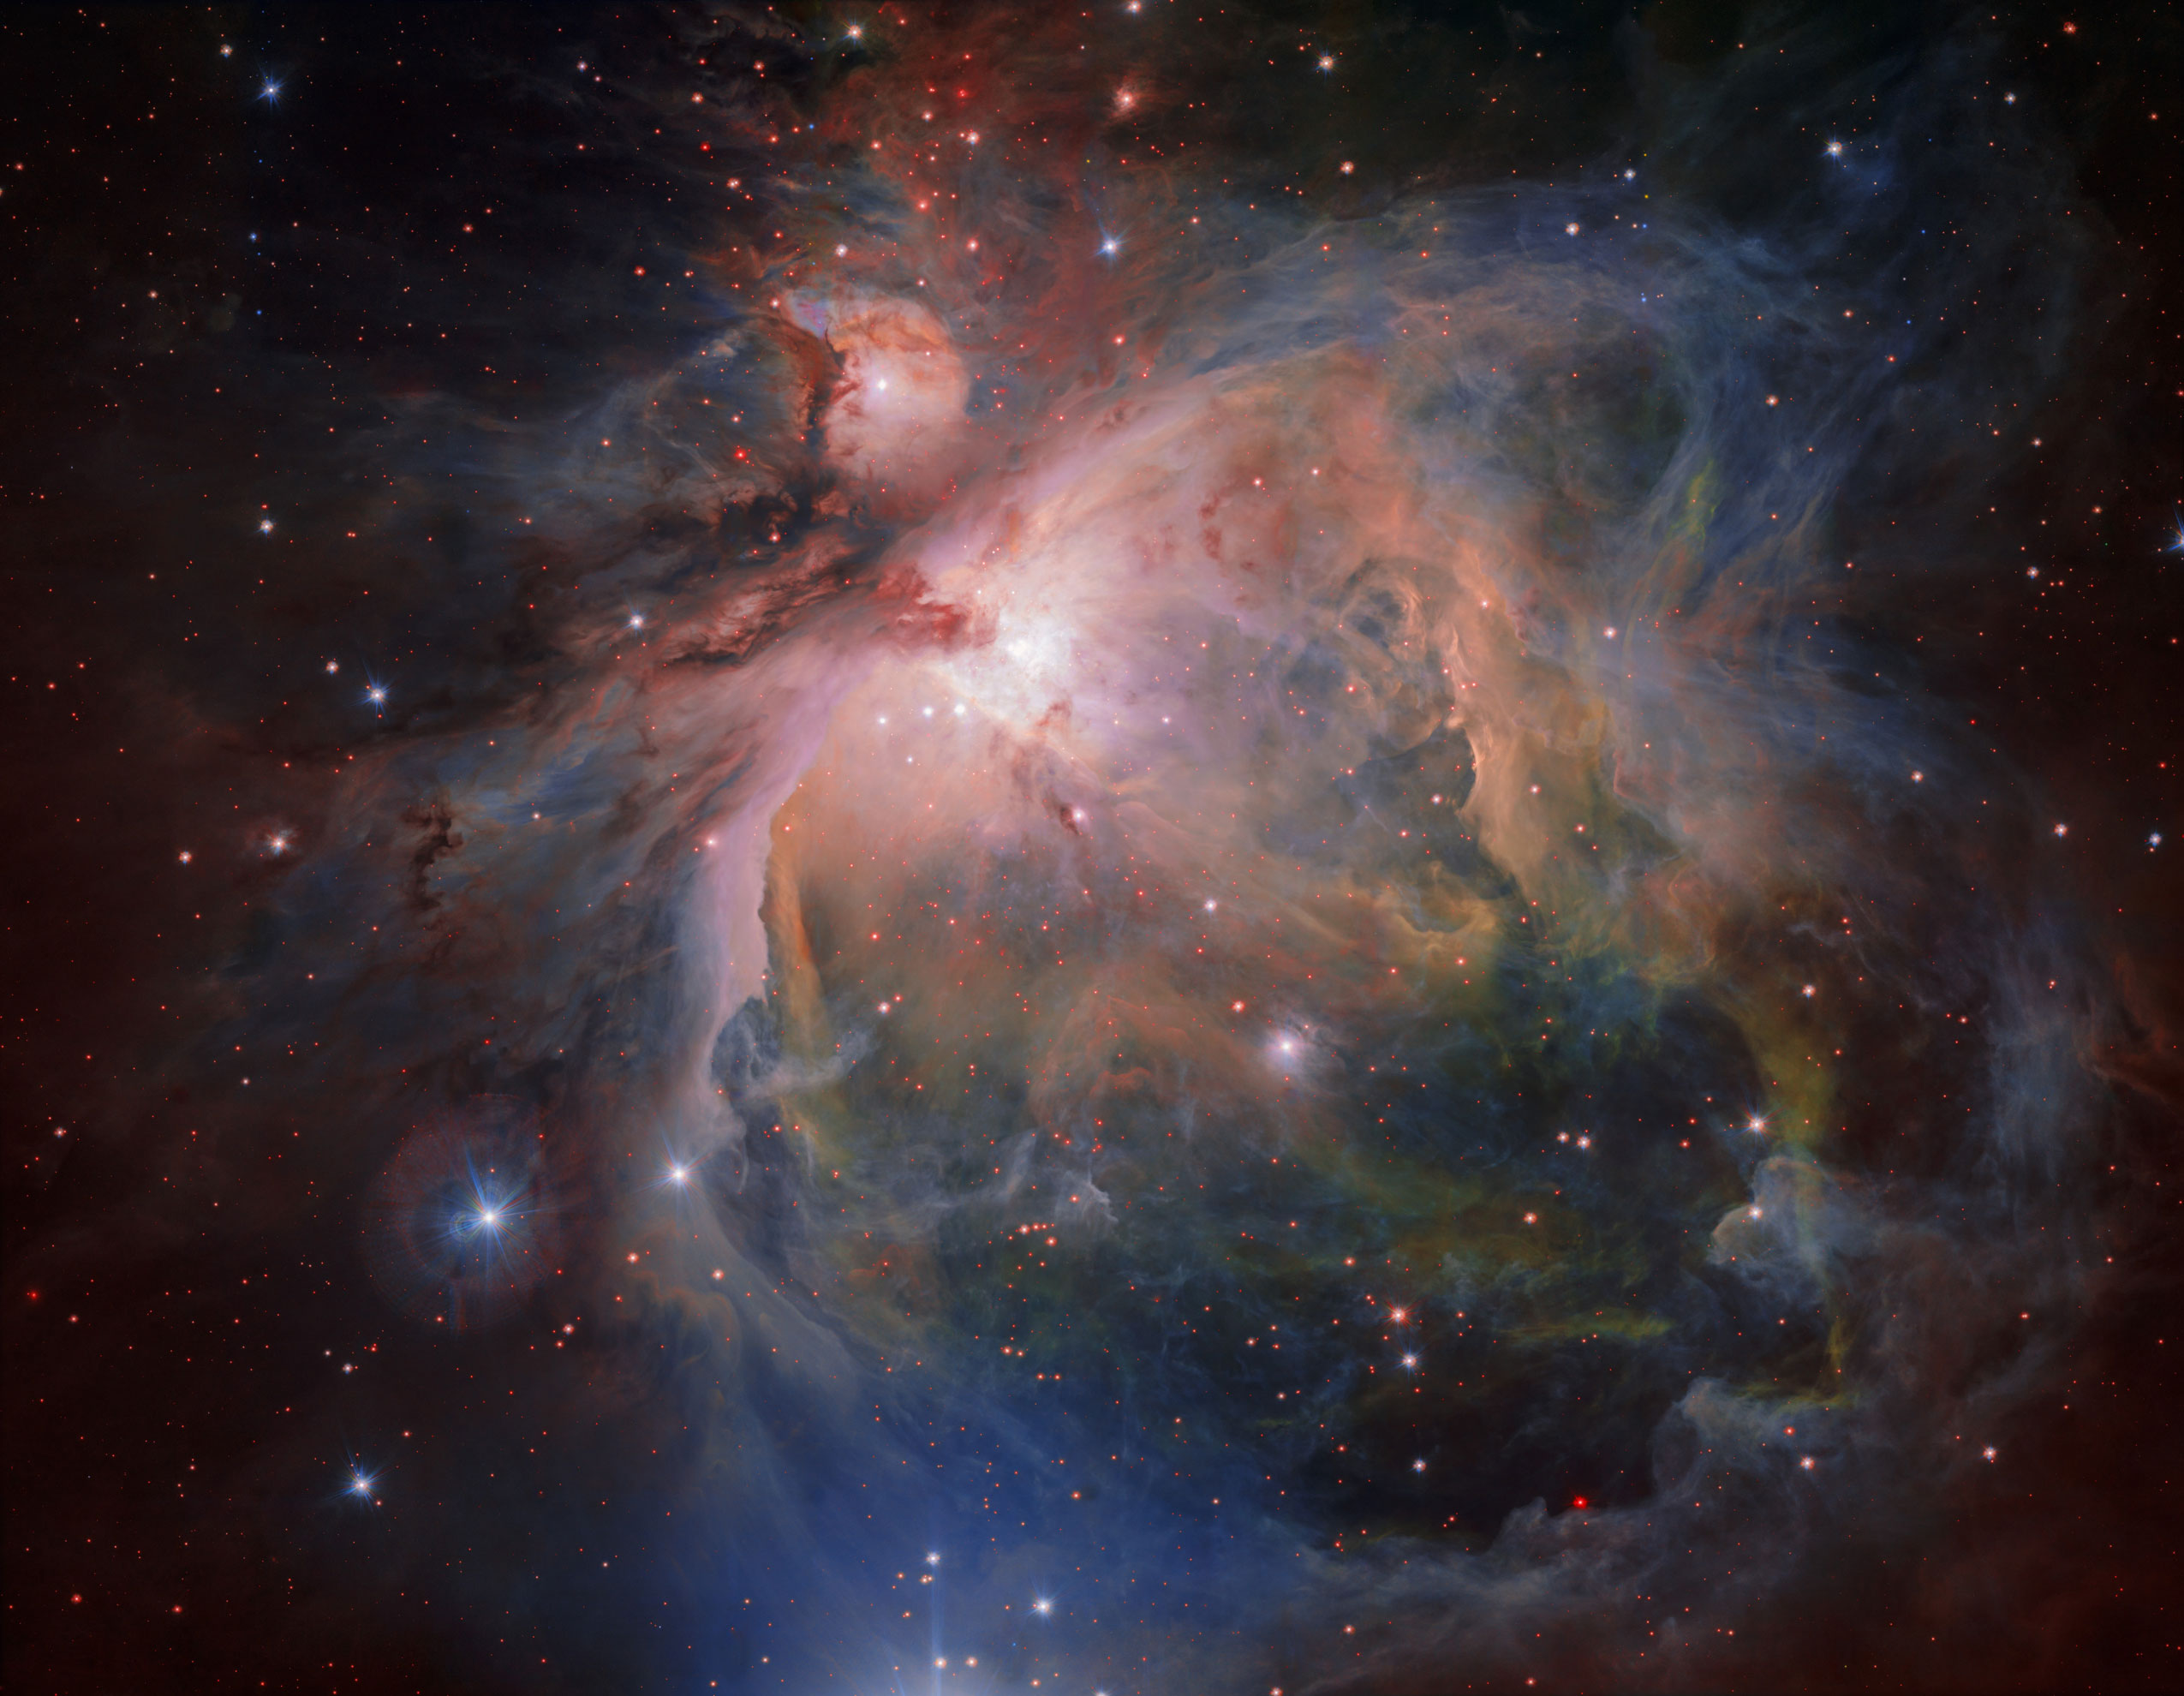 Three Generations of Baby Stars Discovered in the Orion Nebula Cluster